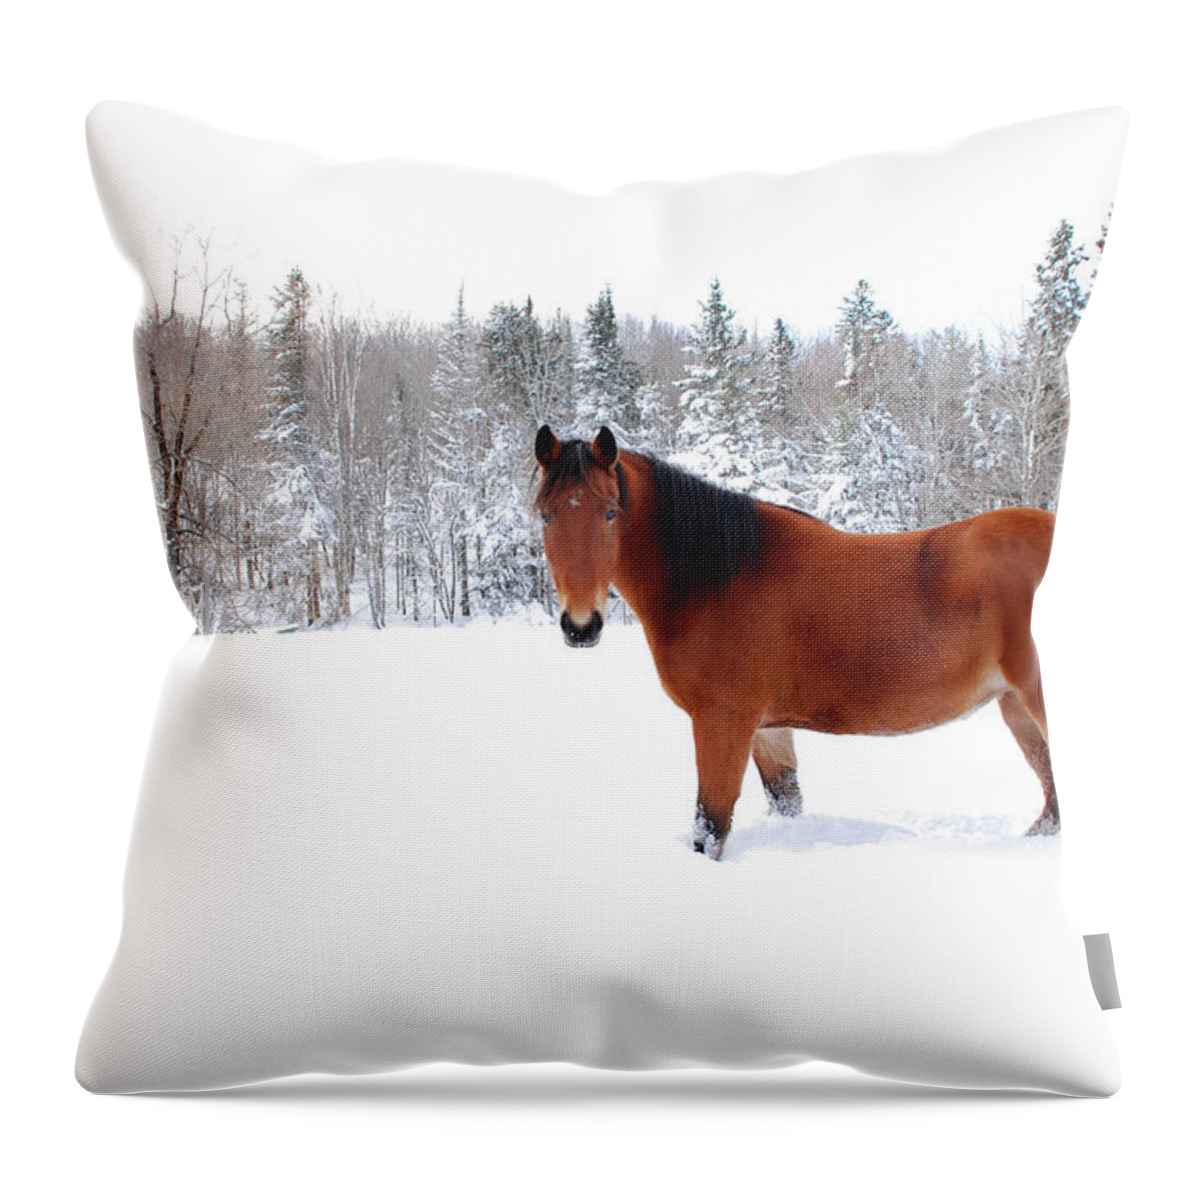 Horse Throw Pillow featuring the photograph Bay Horse Standing Alone In Deep Snow by Anne Louise Macdonald Of Hug A Horse Farm